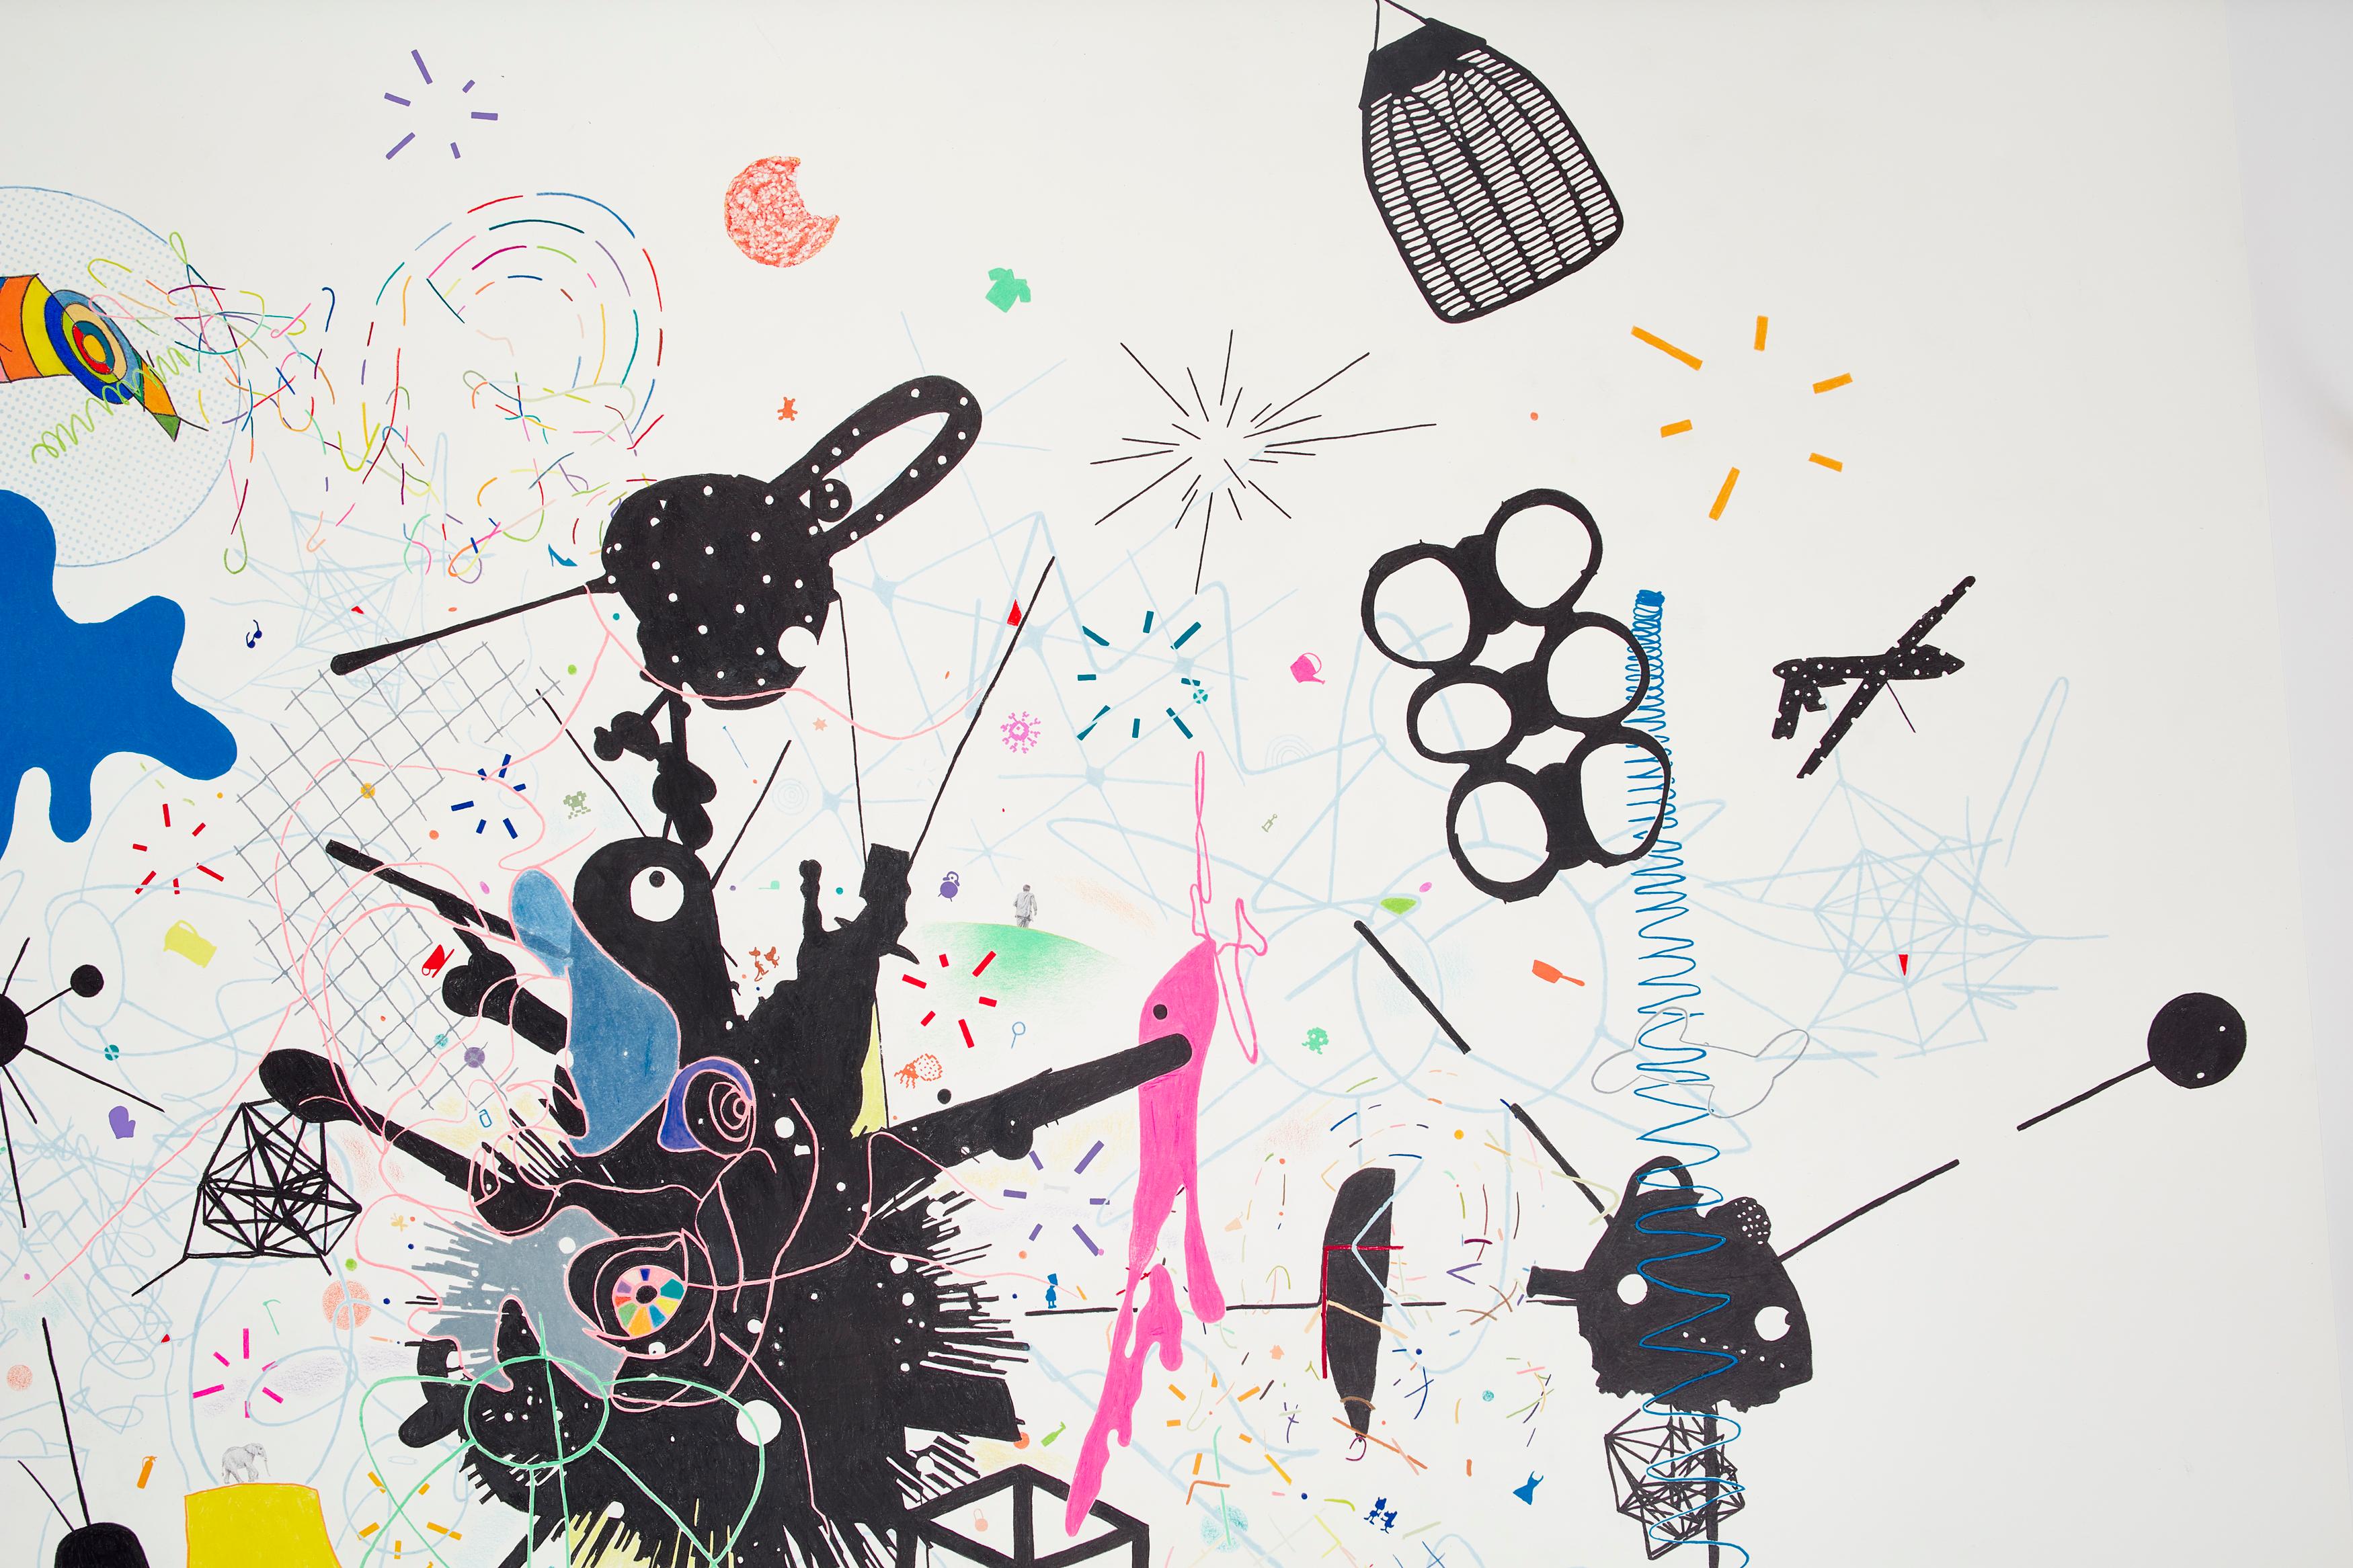 Tom Friedman’s recent works on paper mark a new direction in his practice, following his famous mixed-media hanging wall-installations, which often combine a variety of sculptural, everyday objects suspended from the ceiling. Demonstrating